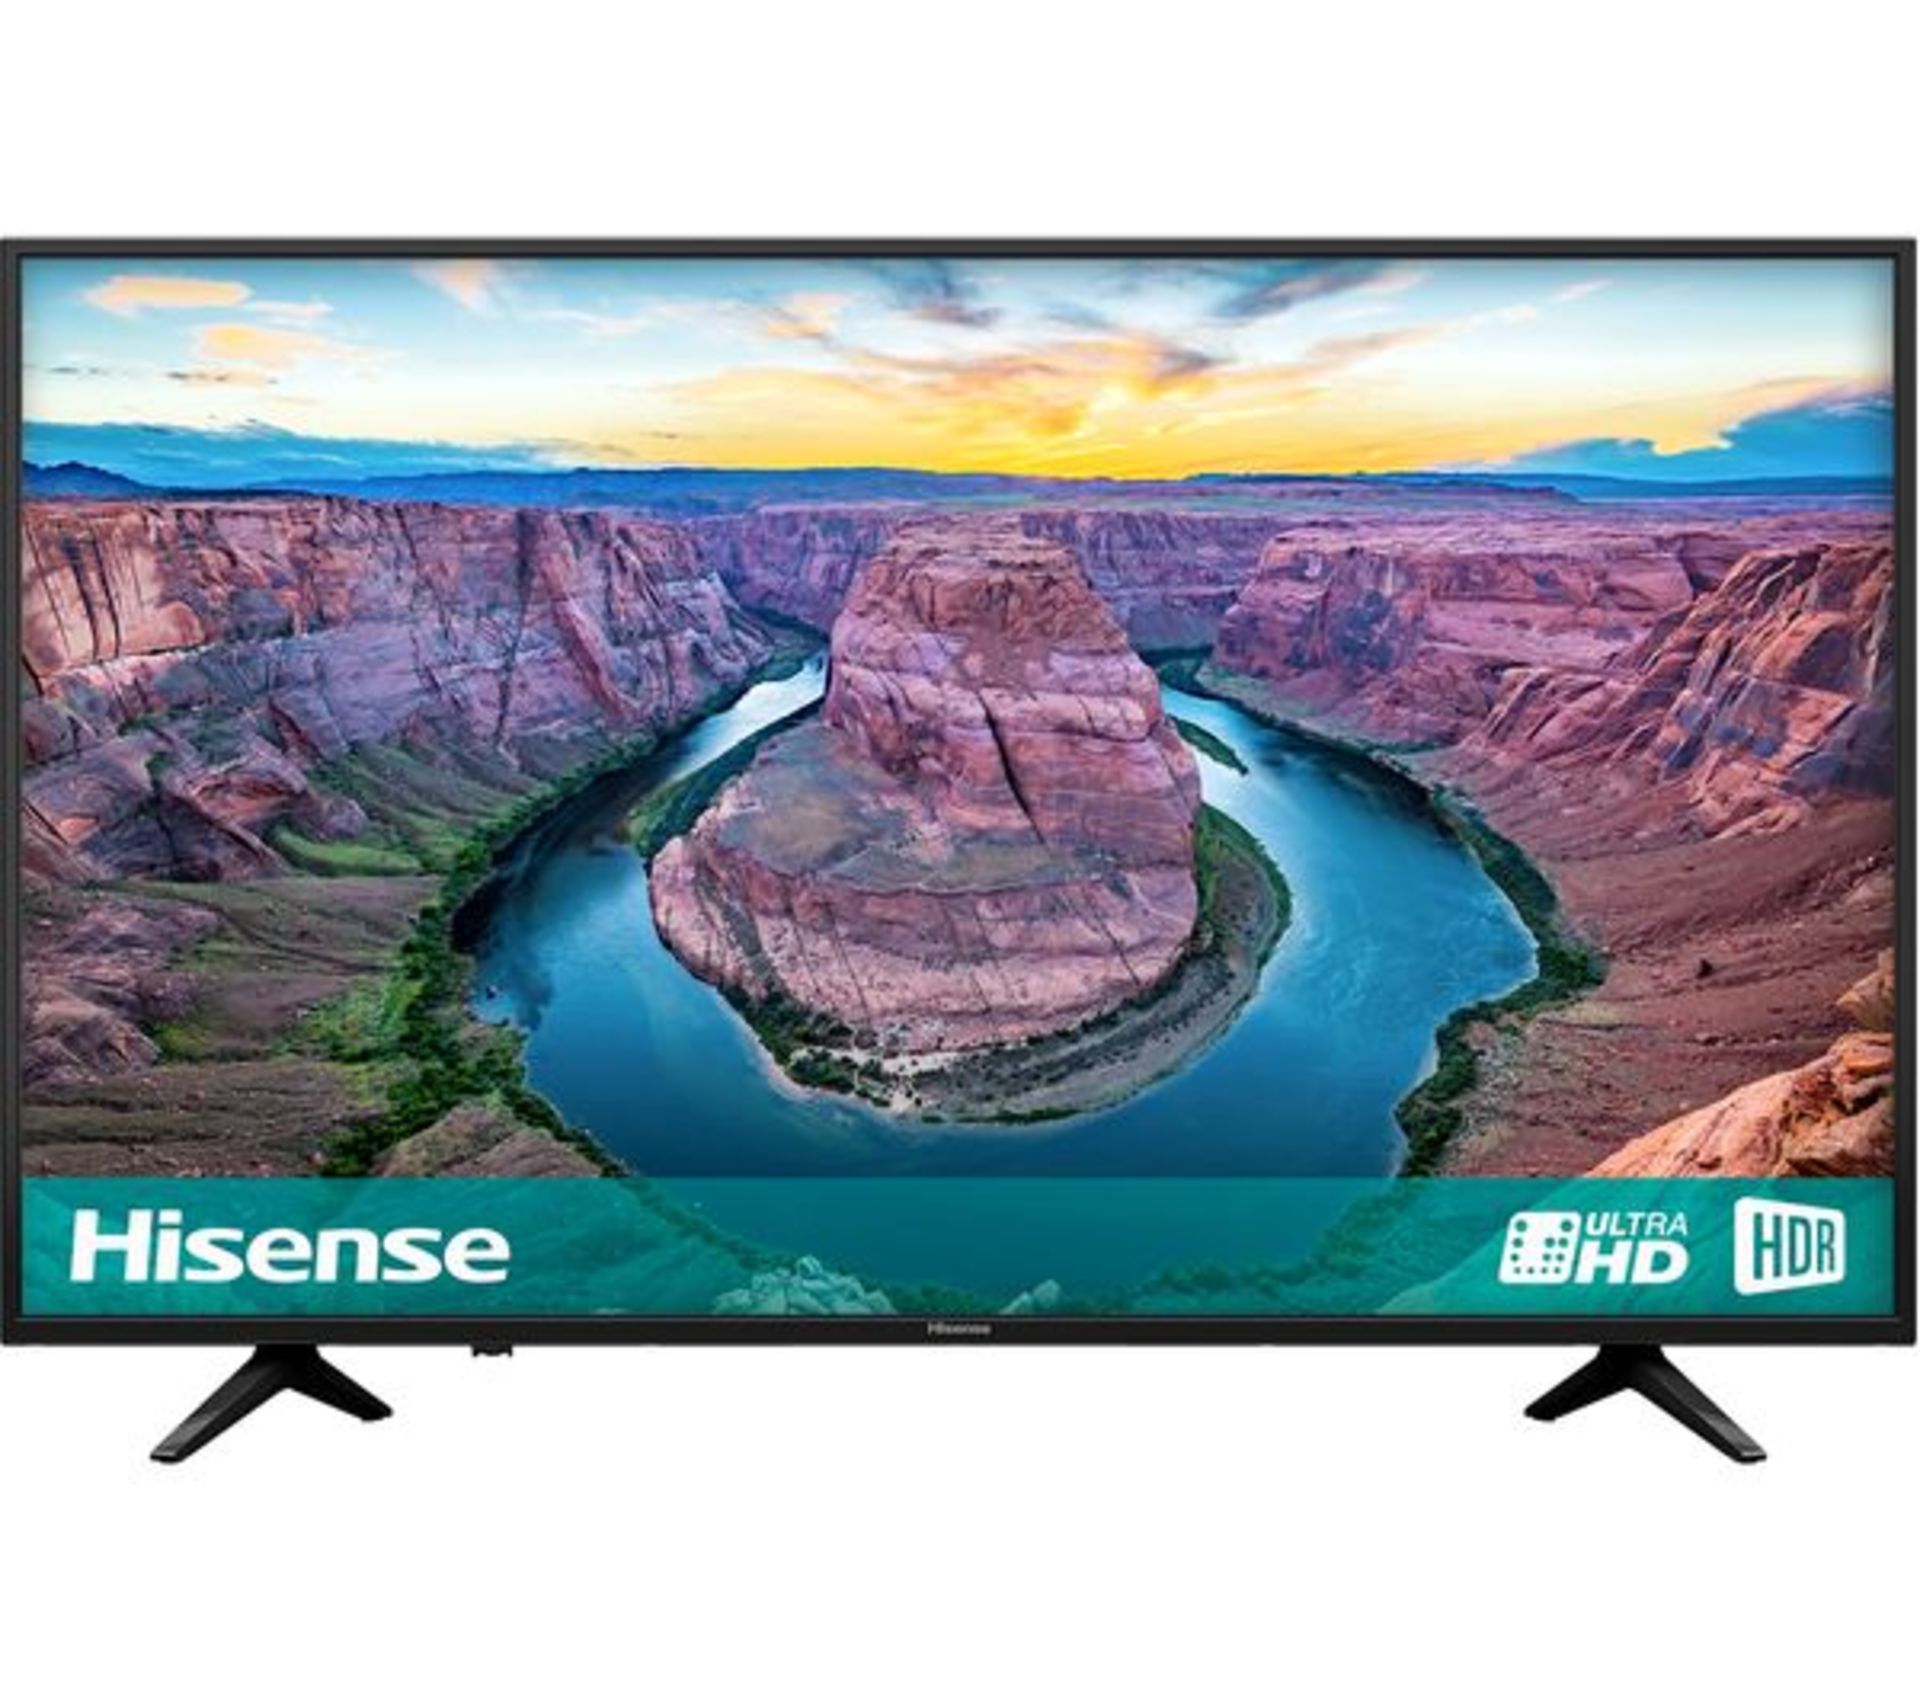 1 HISENSE H58AE6100UK 58" 4K ULTRA HD HDR SMART TV WITH REMOTE RRP Â£699 (POWERS ON BUT NOTHING ON